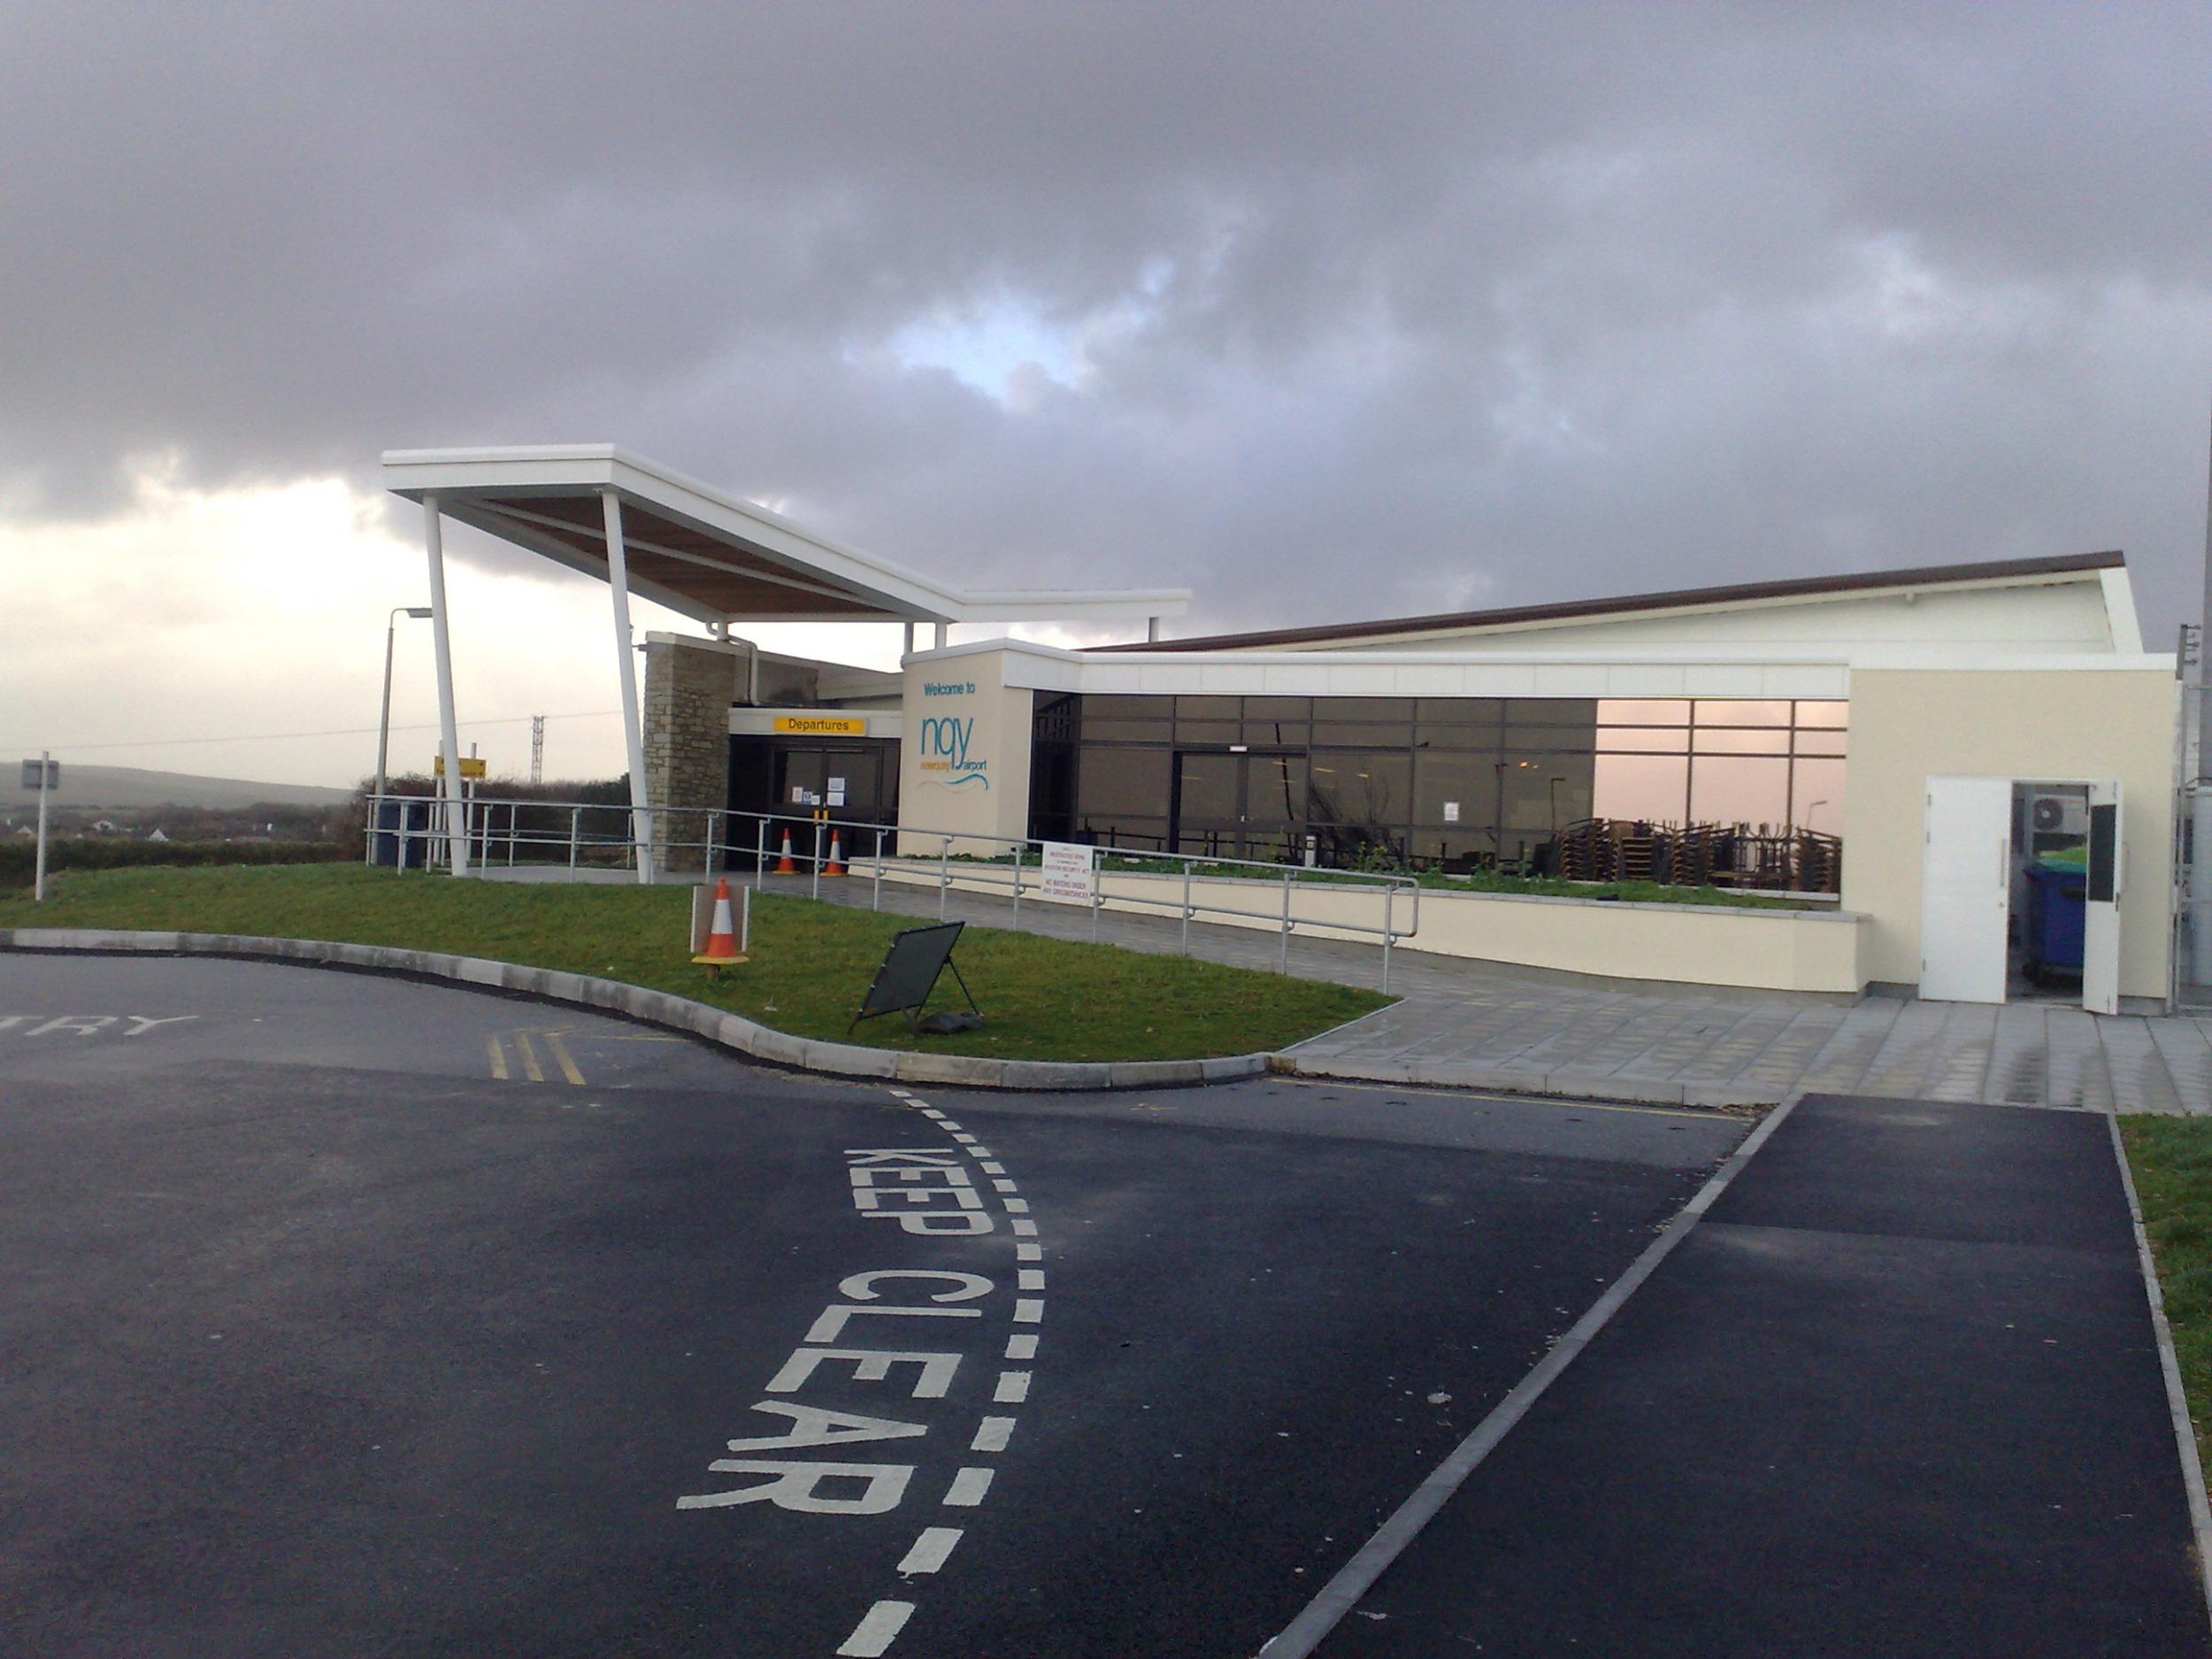 Newquay Airport is fastest growing for second year running